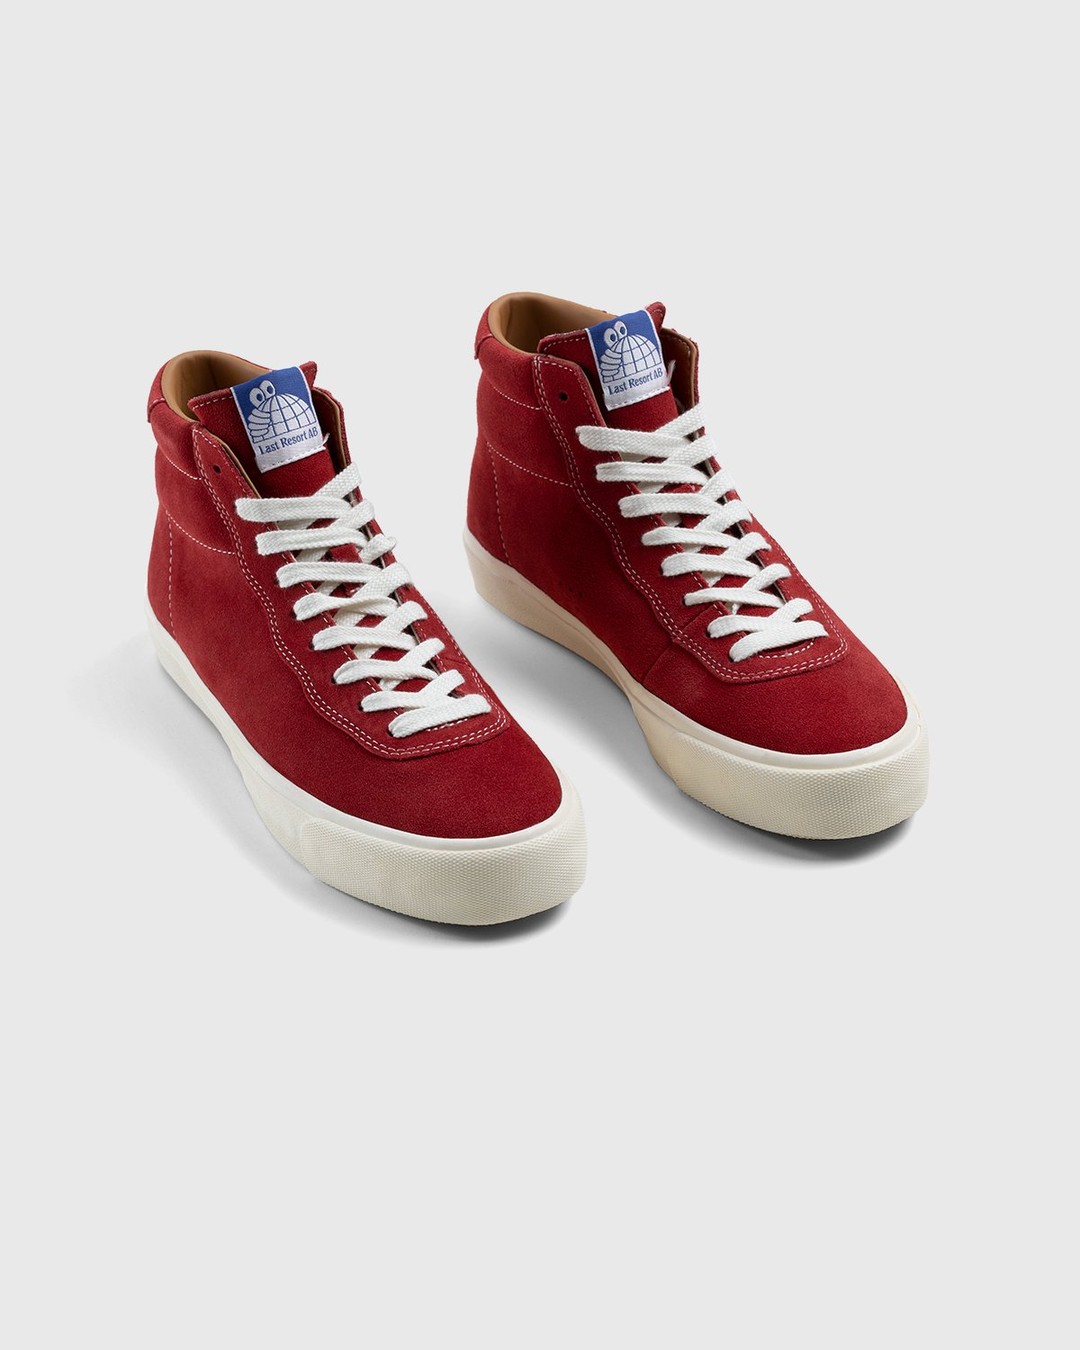 Last Resort AB – VM001 Hi Suede Old Red/White - High Top Sneakers - Red - Image 3